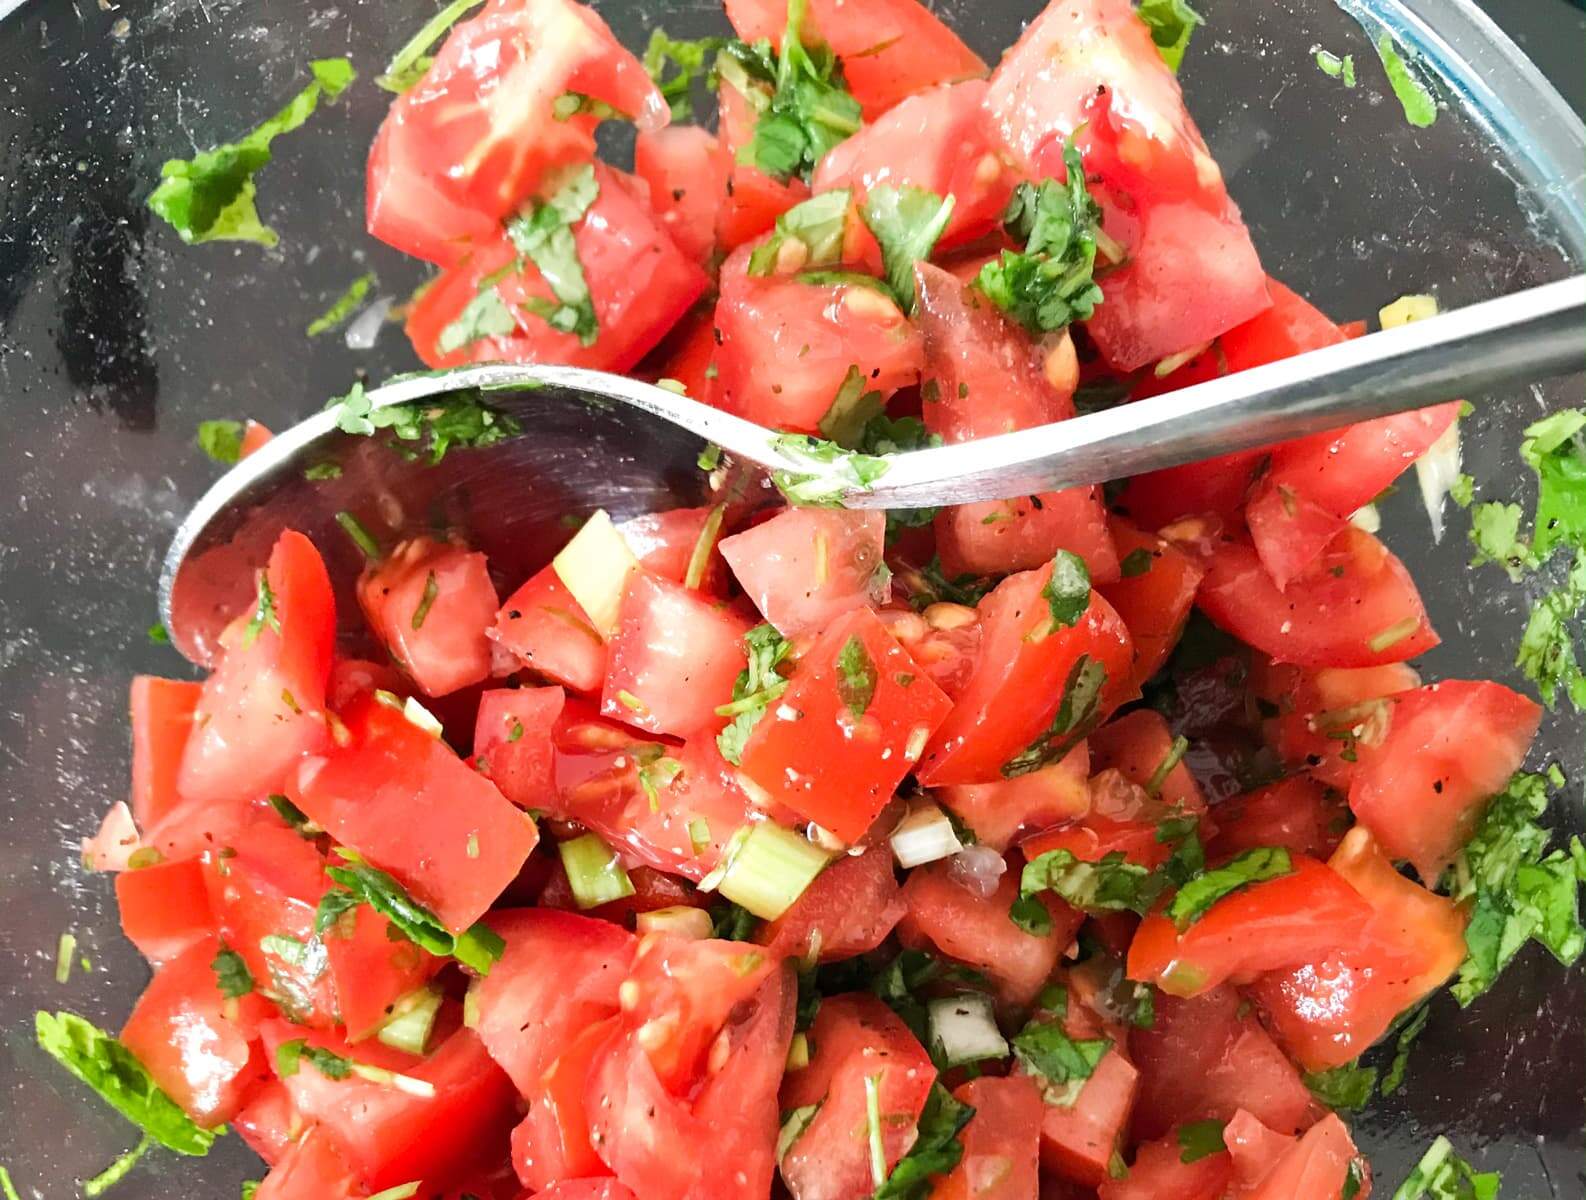 Mixing the fresh chopped tomatoes, spring onions and herbs in a bowl to finish off the tomato salsa.